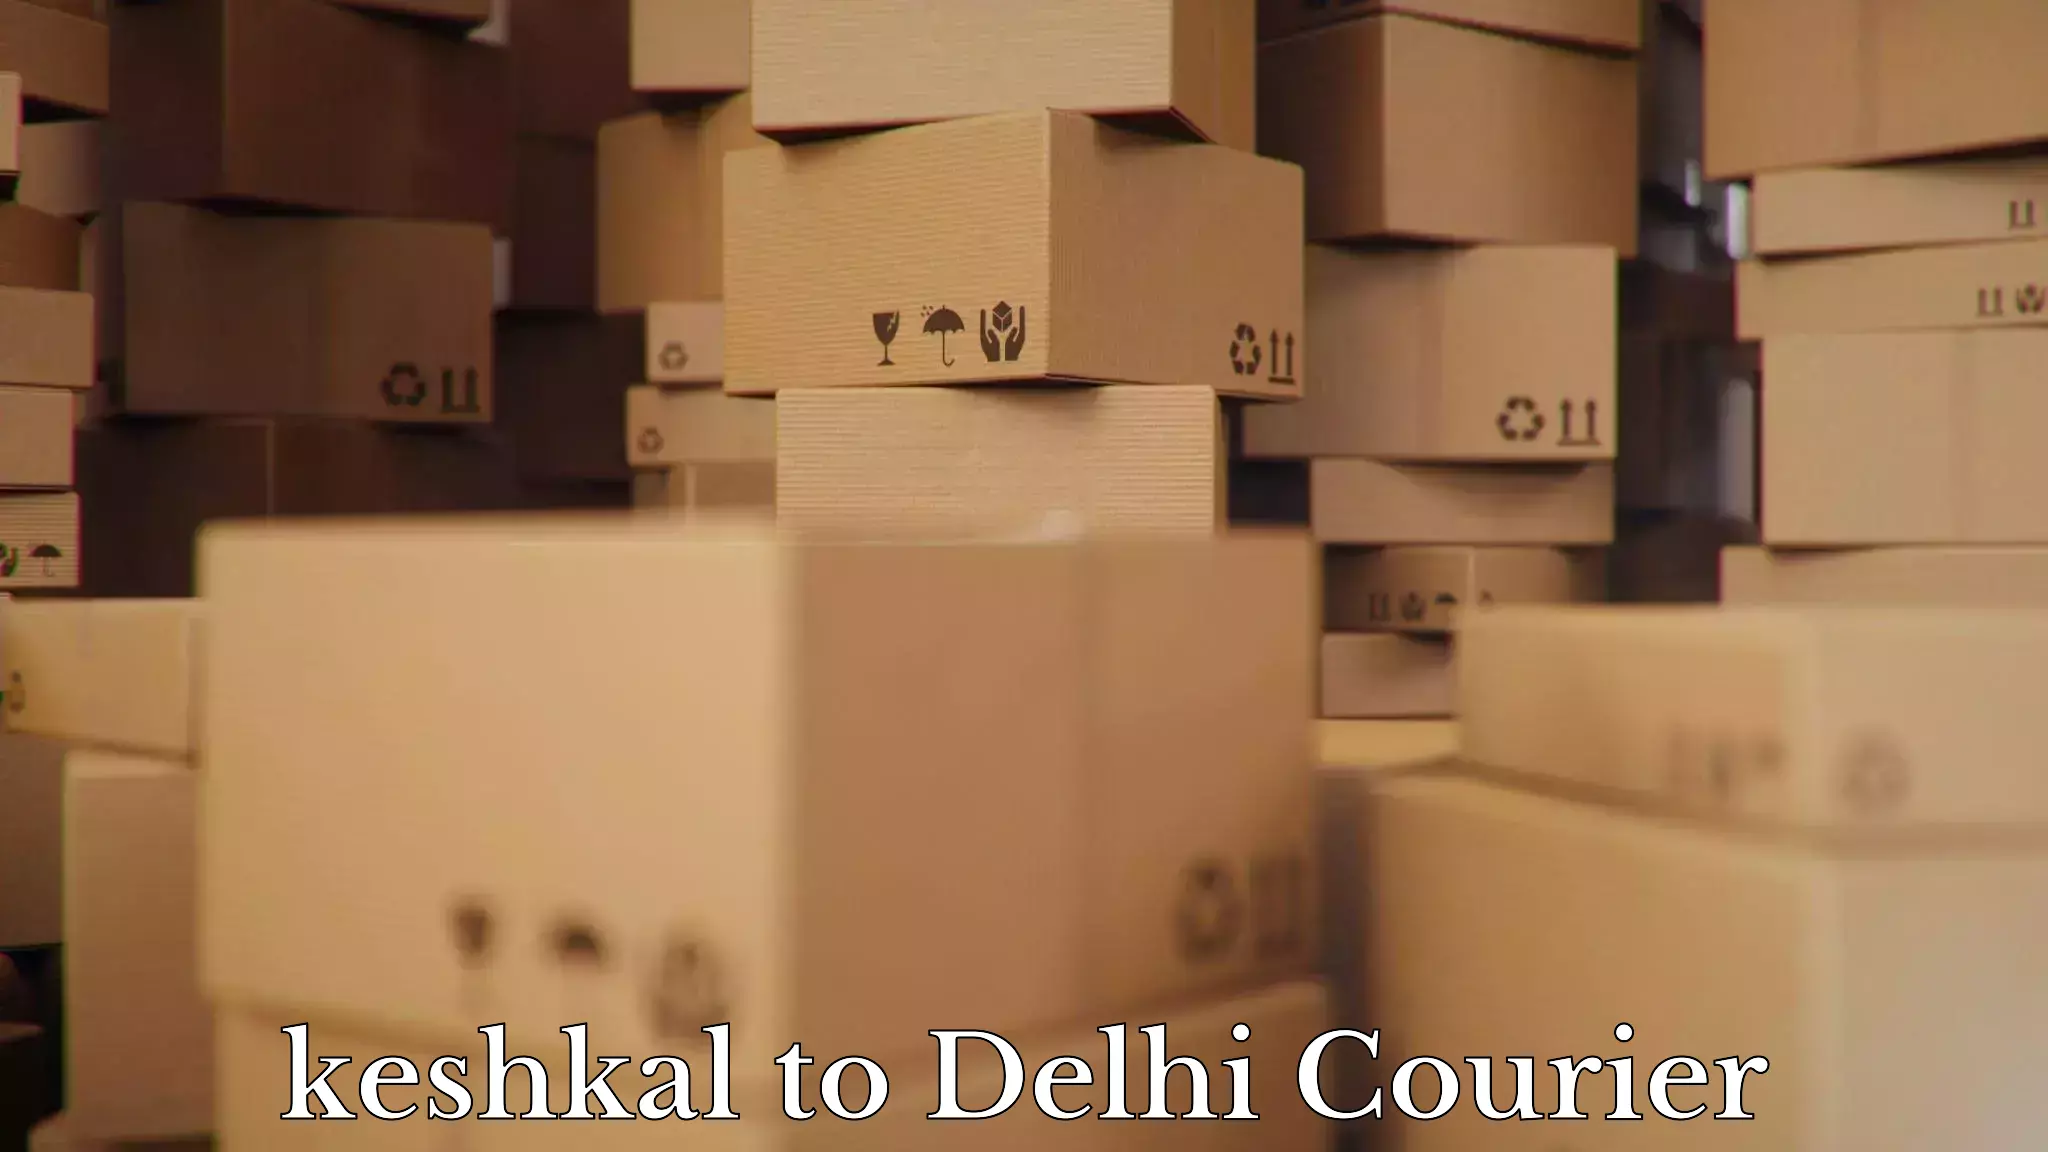 Professional packing services keshkal to IIT Delhi